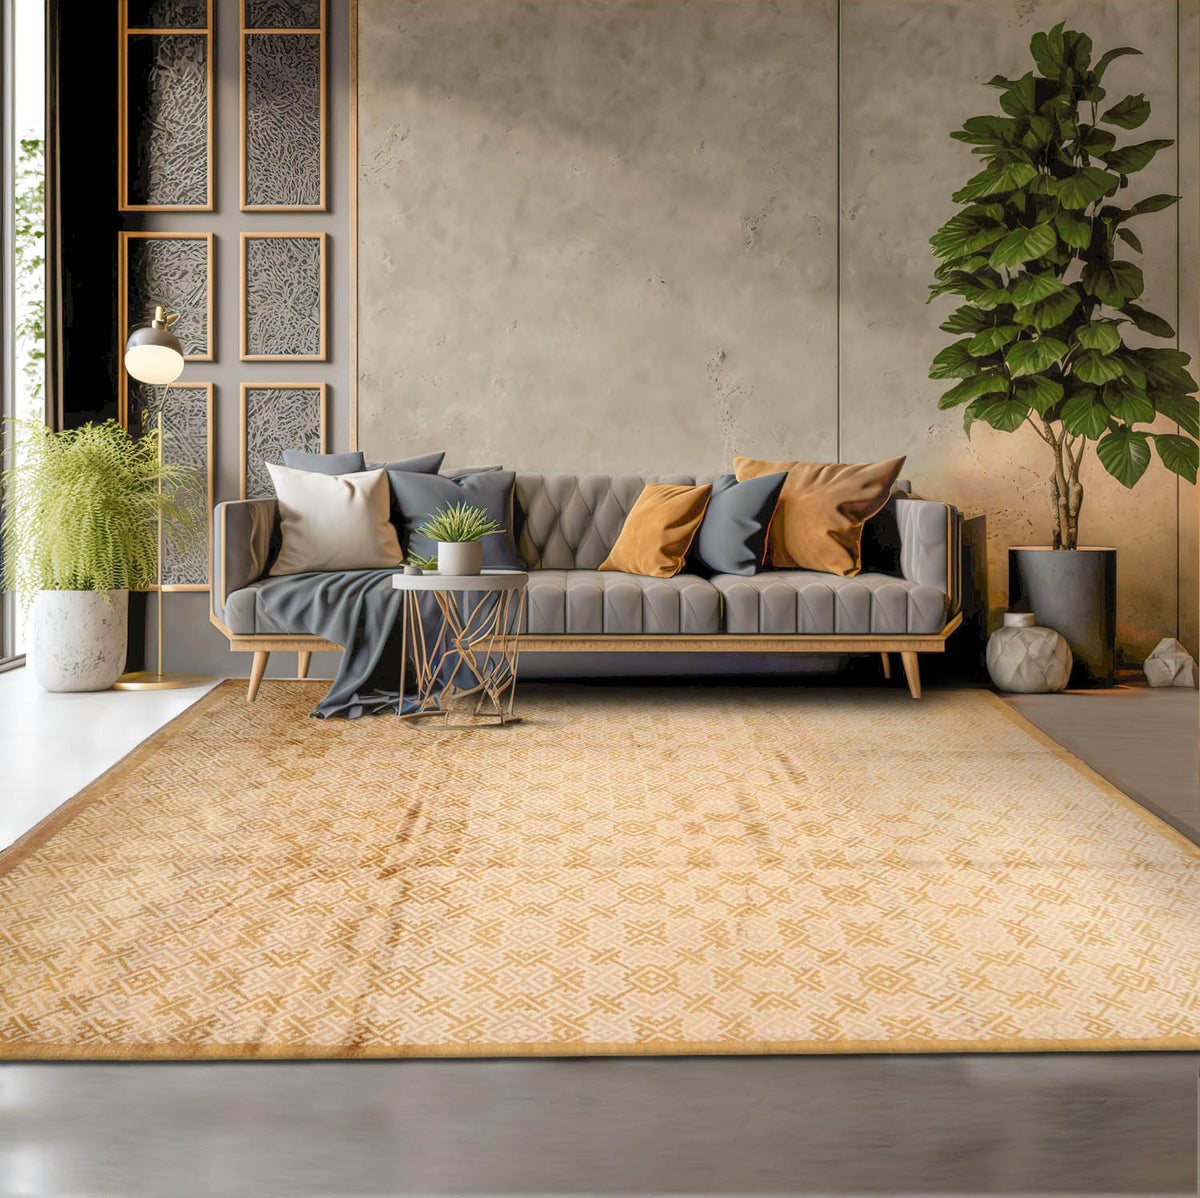 Latrisha 9x12 Hand Knotted Persian 100% Wool  Transitional  Oriental Area Rug Beige,Gold Color